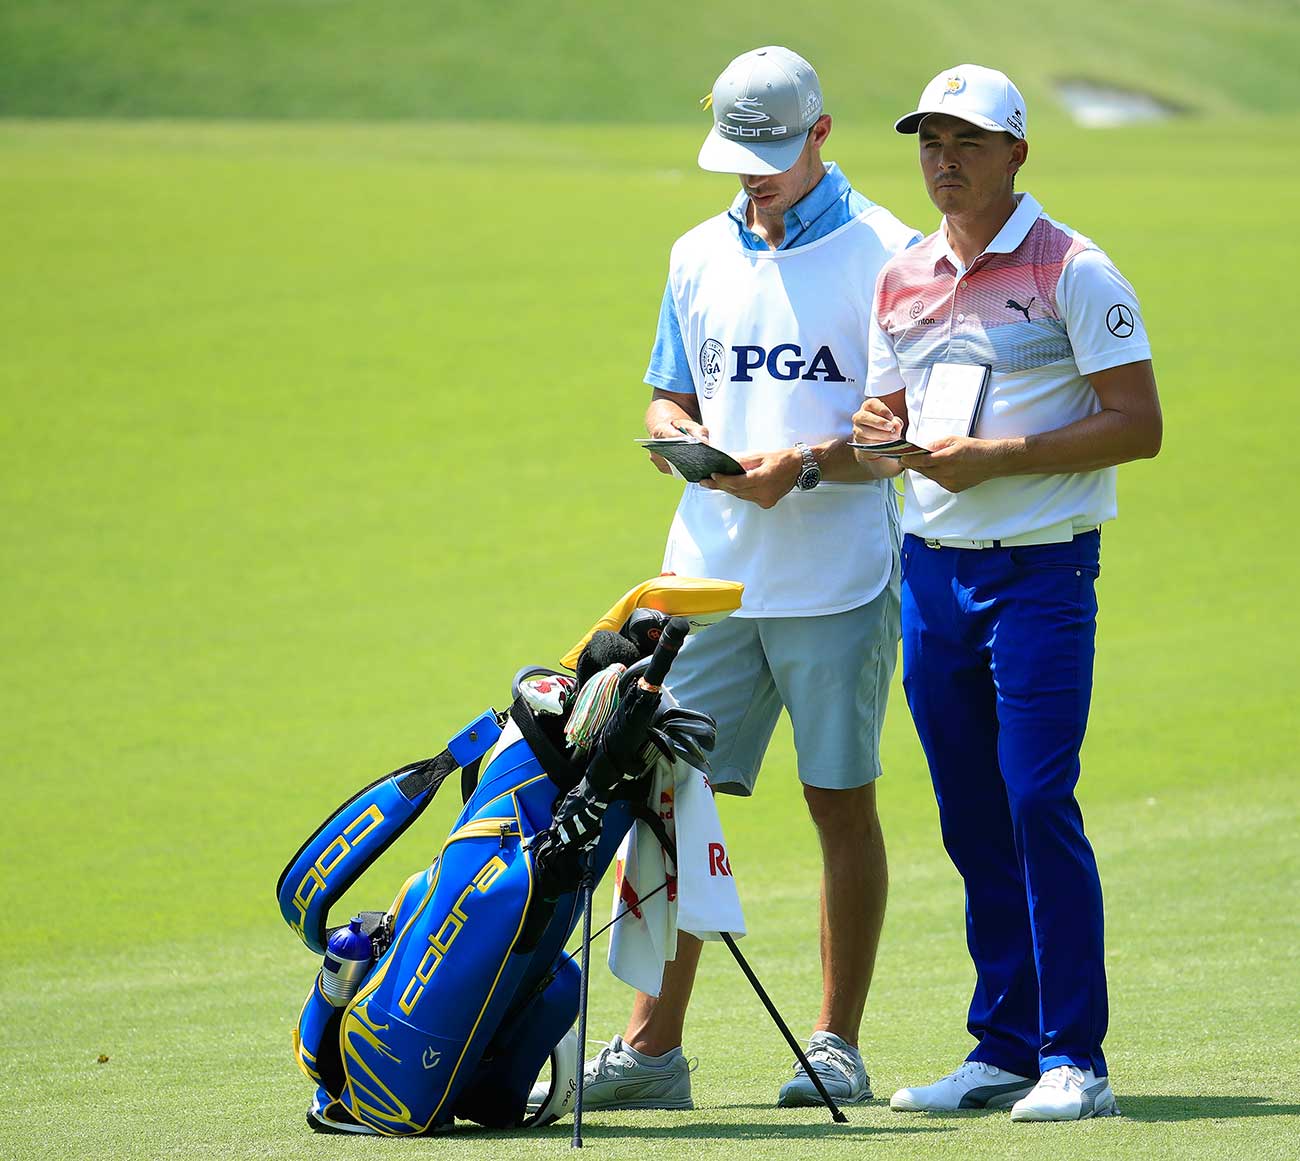 Rickie Fowler and caddie talk over a shot.